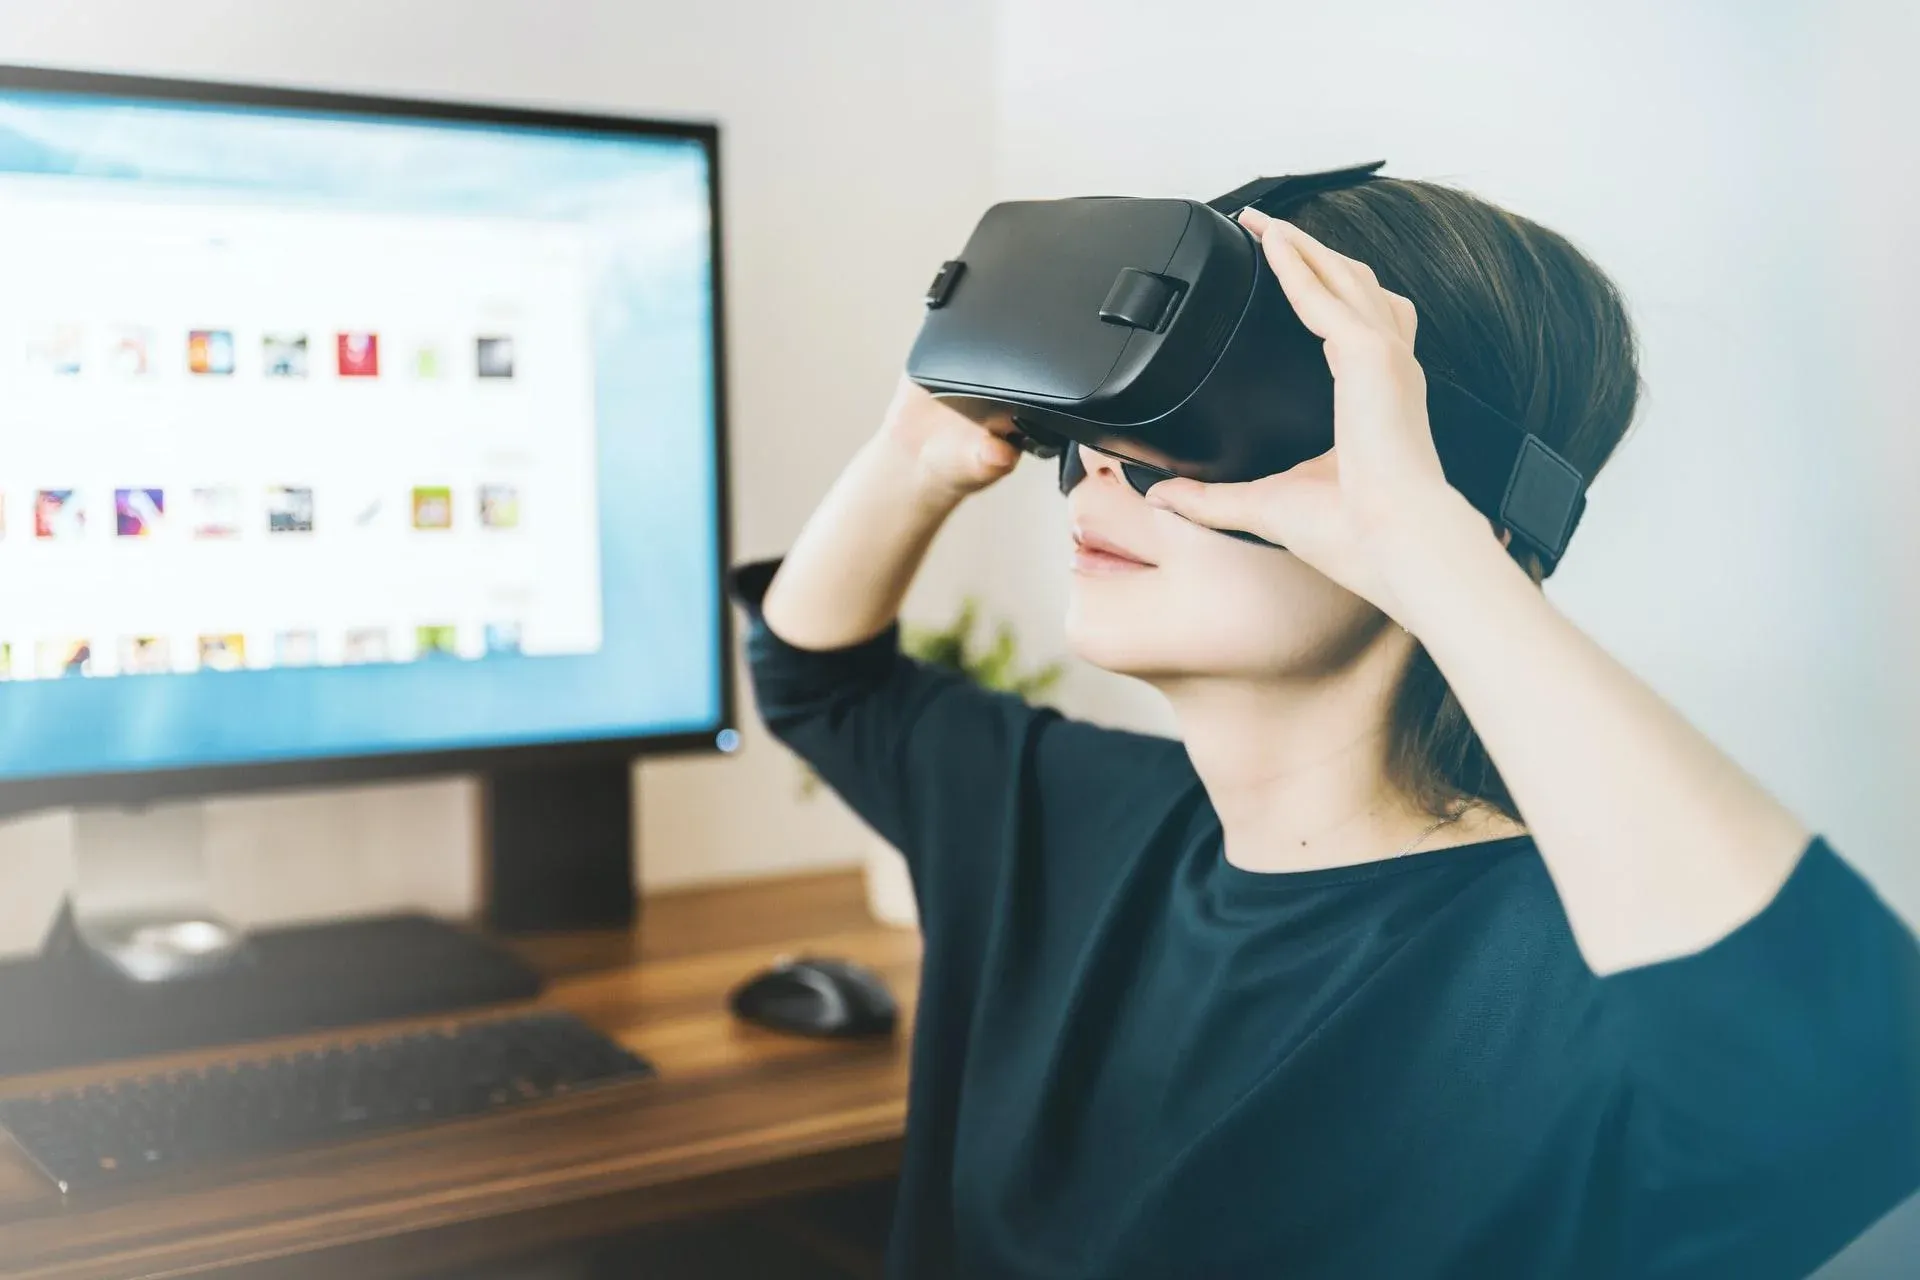 "A student sits at her desk at home with a VR headset at home. Virtual reality is one of the ways homeschool families are expanding their curriculum in new and innovative ways to keep their kids engaged